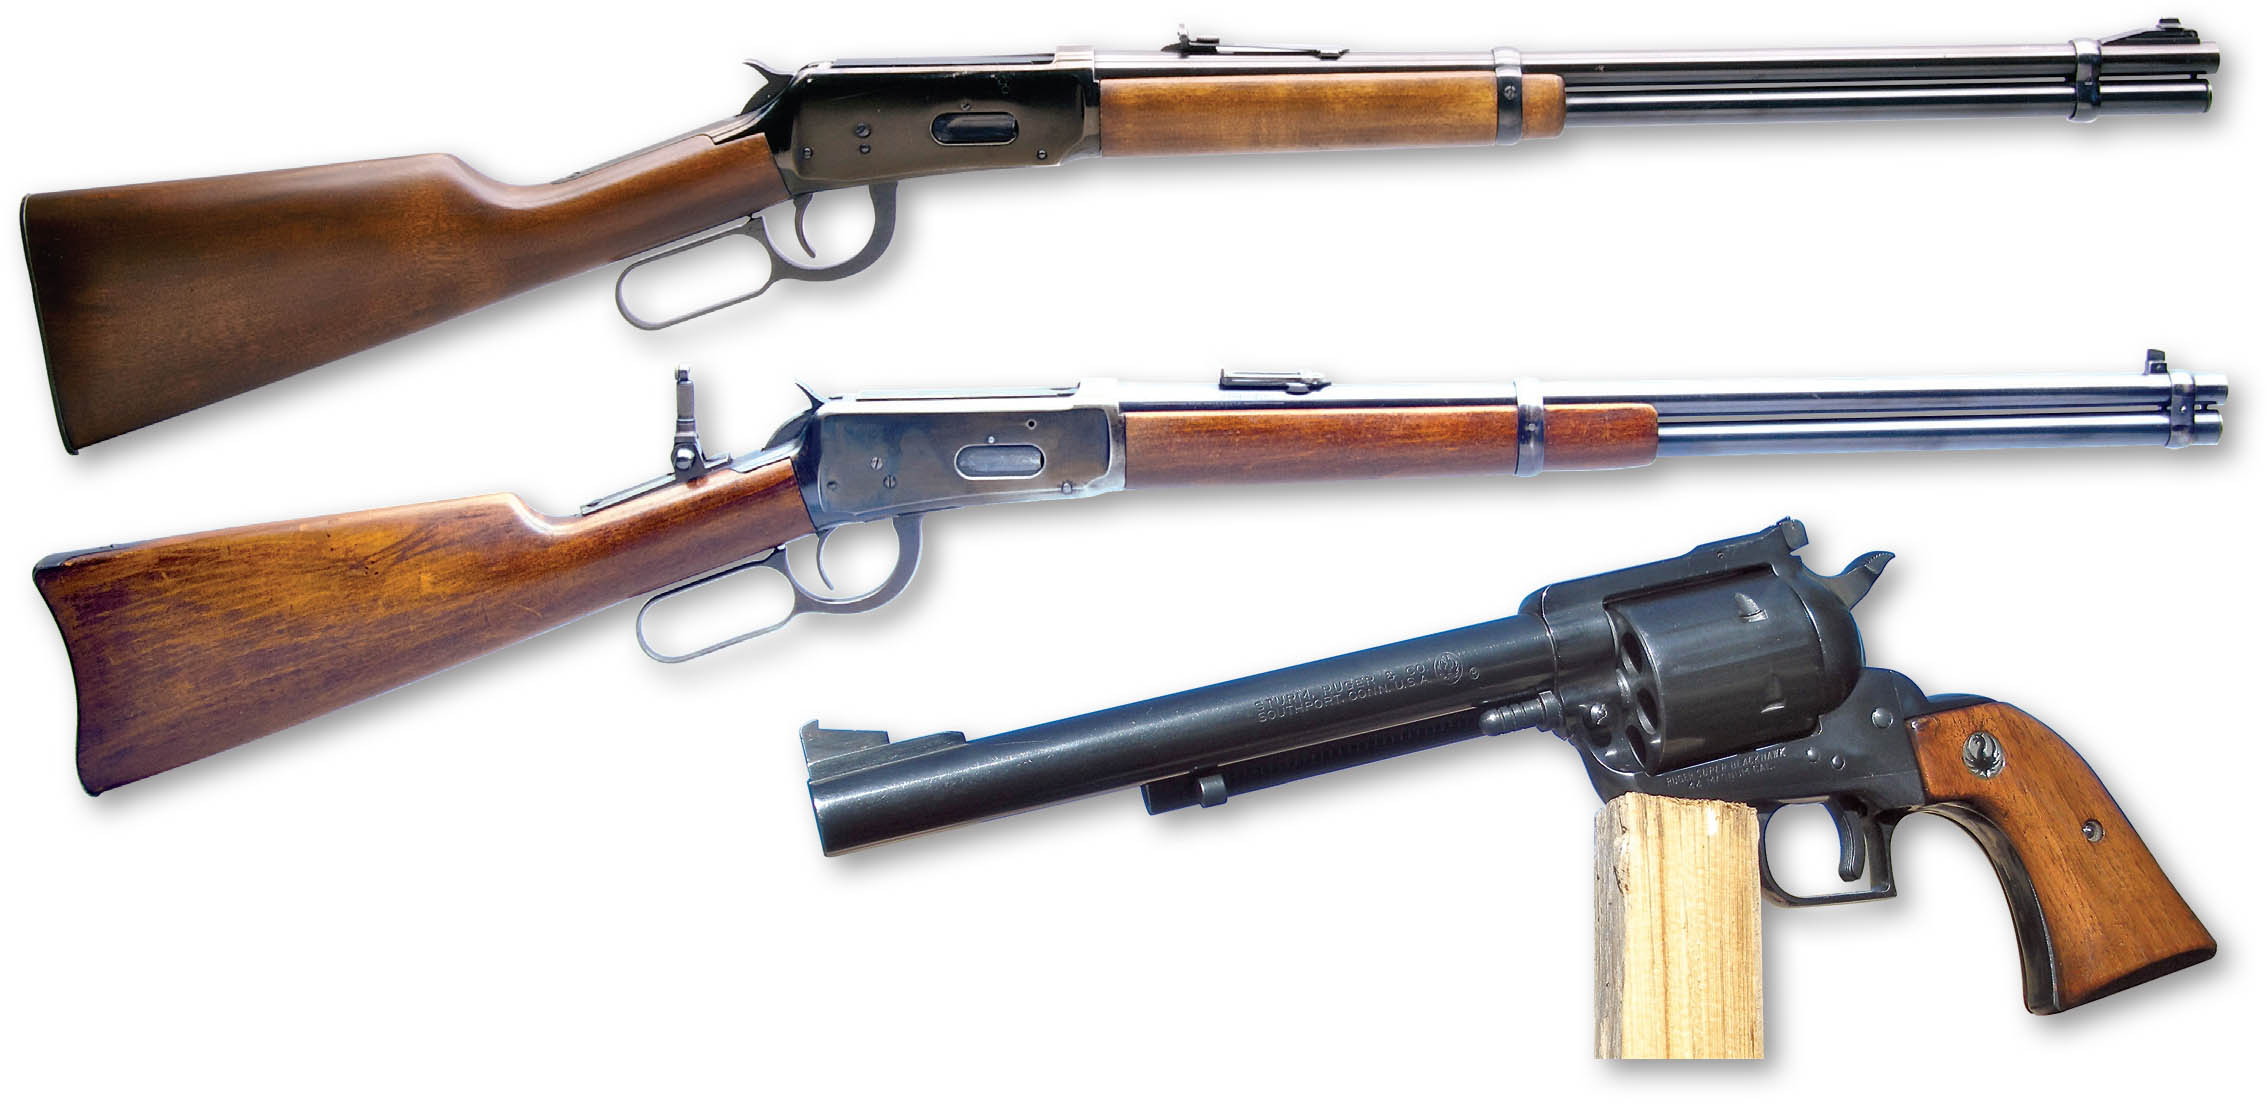 A Model 94 .44 Magnum (top) and/or a .30 WCF carbine (middle) have greater range, accuracy and power than a .44 Magnum revolver (bottom).